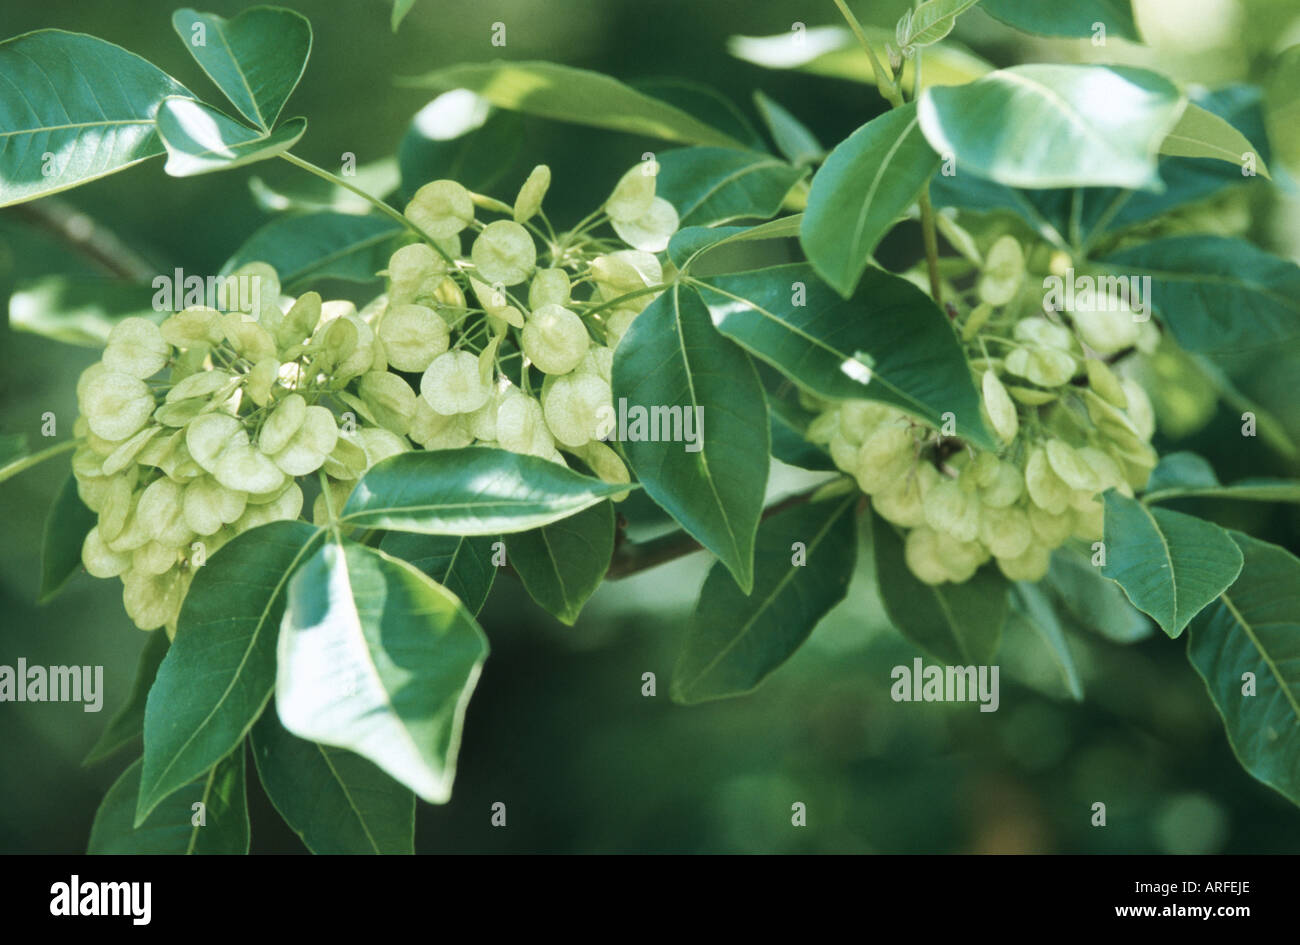 wafer ash, hop tree, stinking ash (Ptelea trifoliata), young fruits Stock Photo